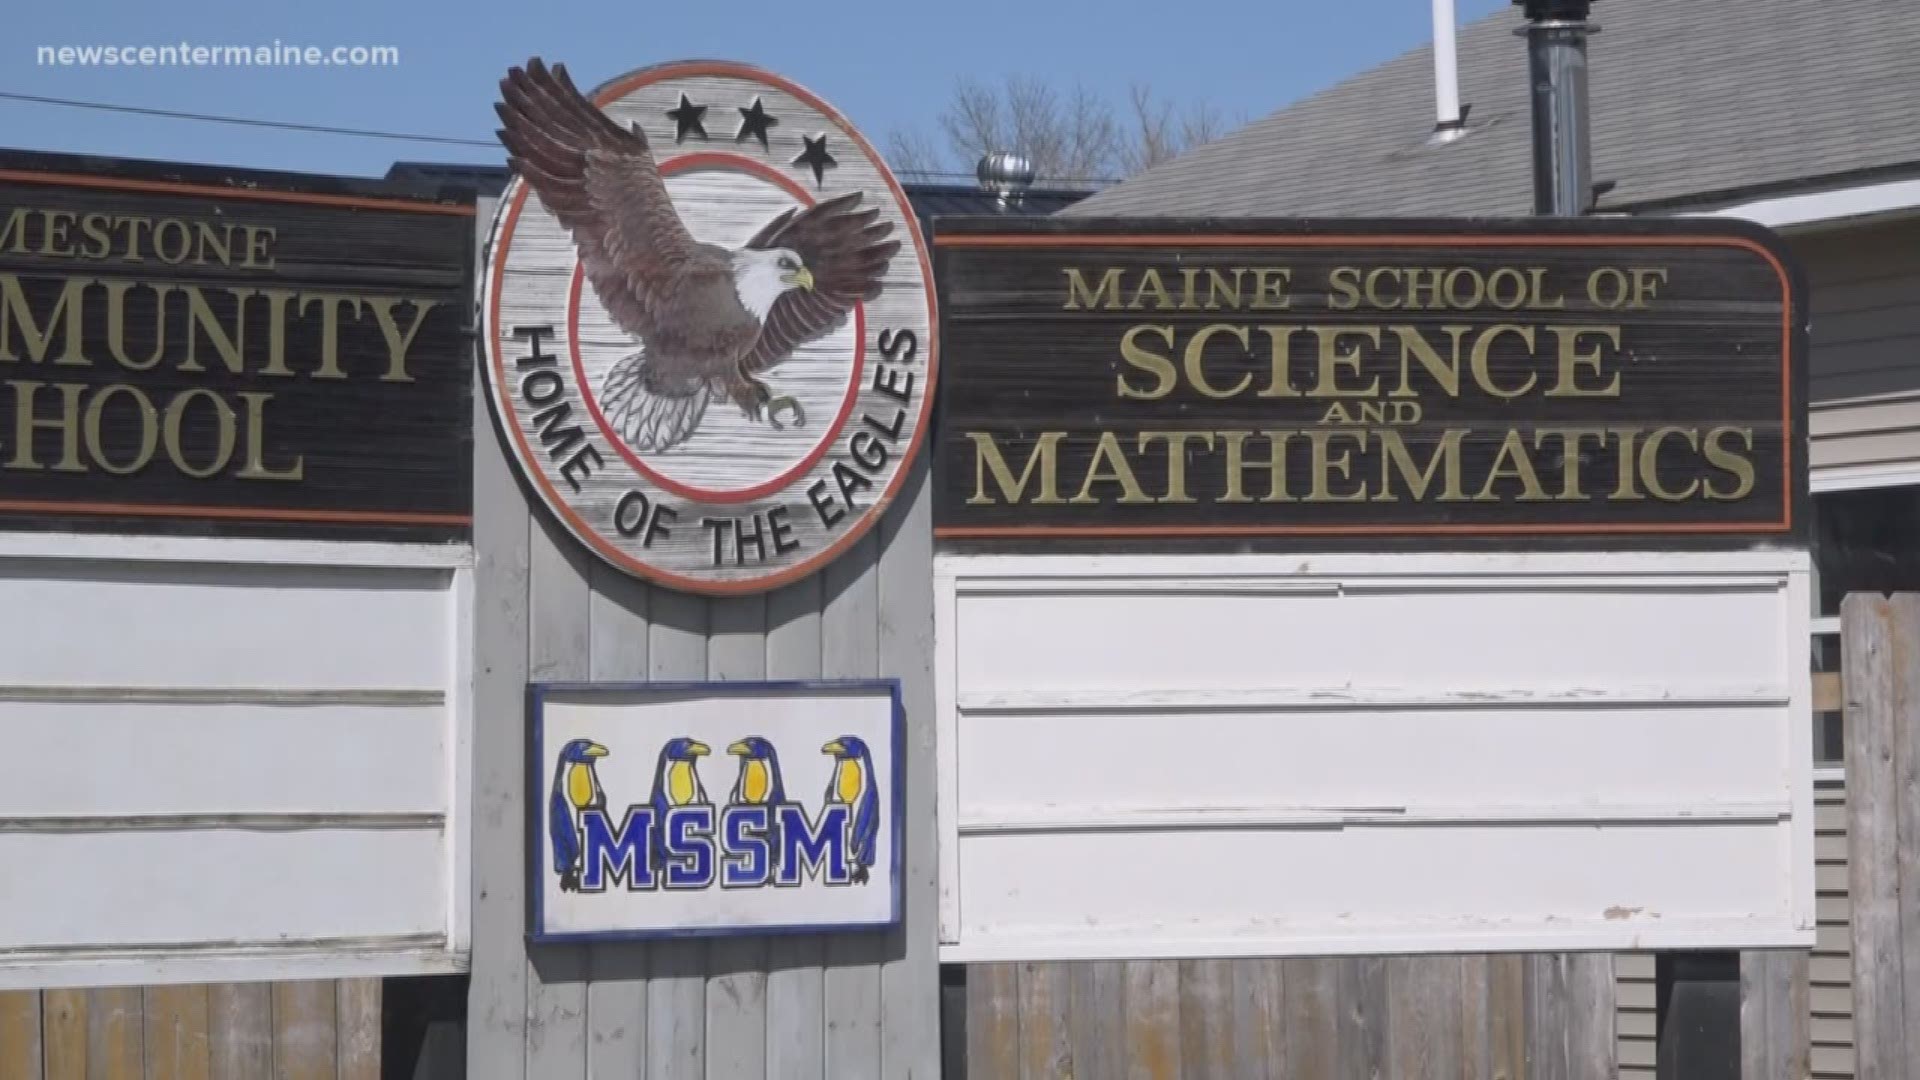 Students and faculty share what it's like to attend the Maine School of Science and Mathematics.